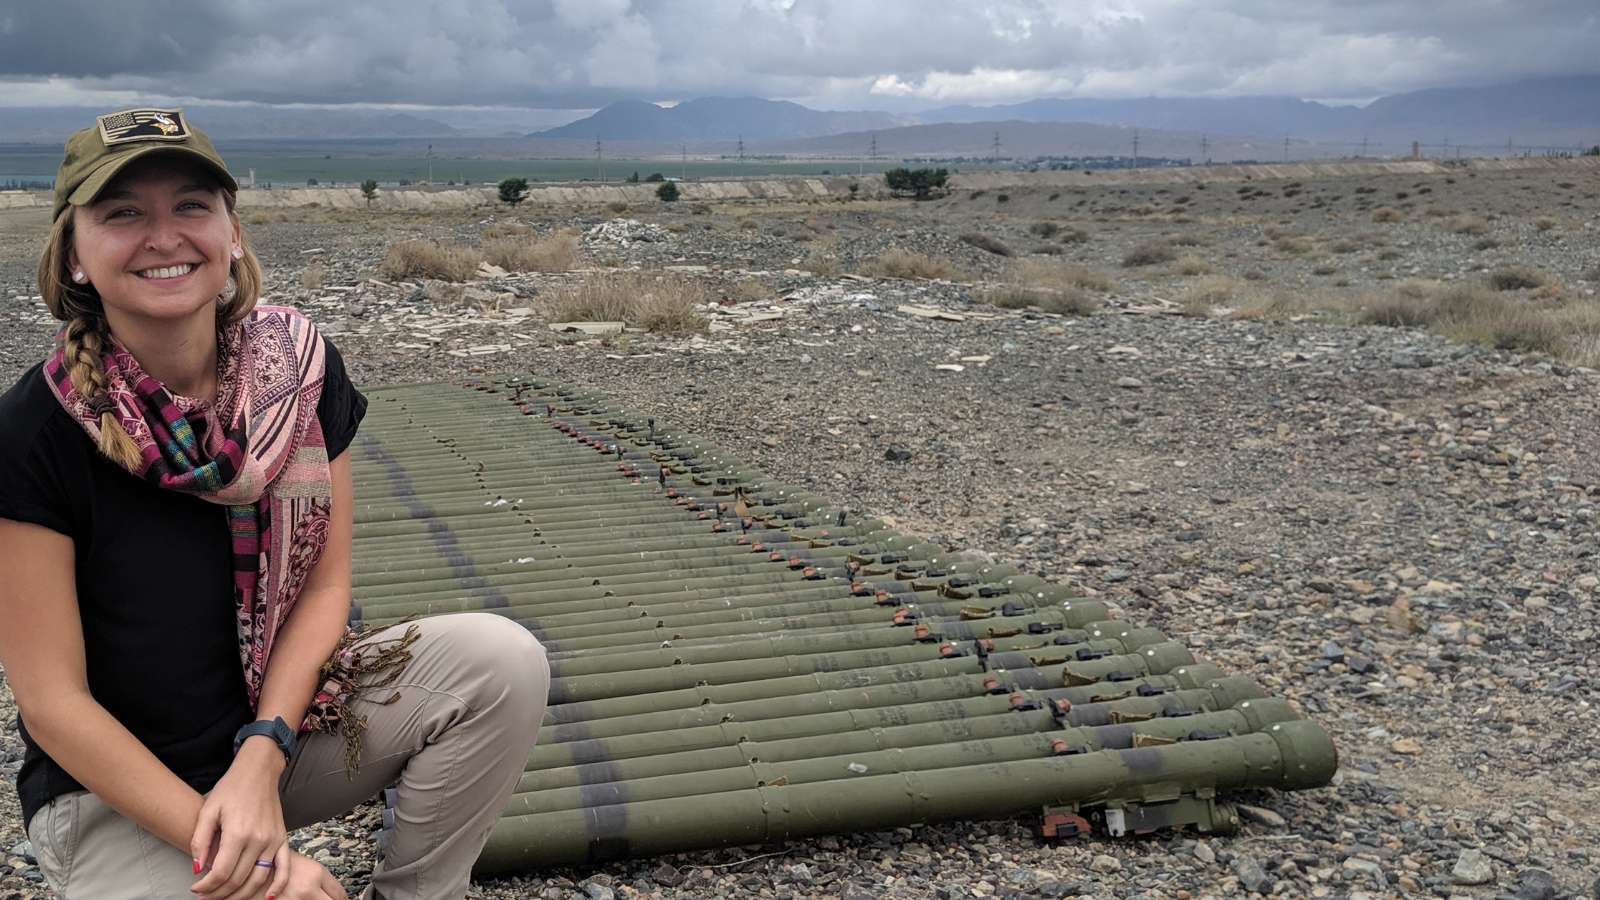 Aimee Falkun, the Strategic Advisor with the PM Bureau’s Office of Weapons Removal and Abatement, inspects MANPADS tubes set out for destruction, Kyrgyz Republic, 2019. (State Department photo)